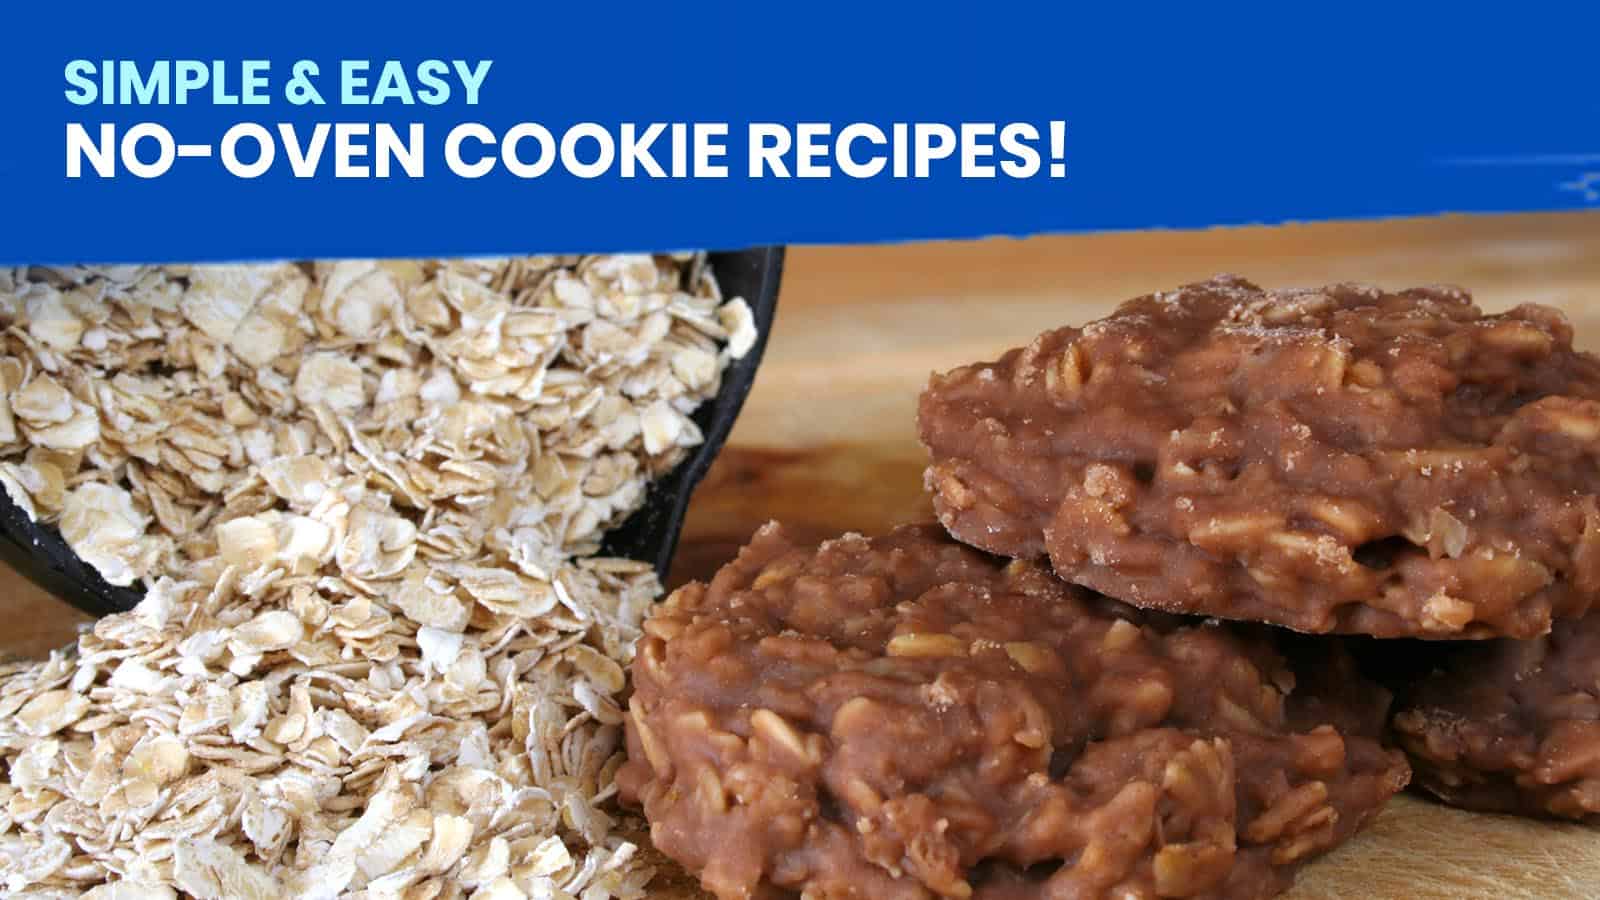 10 Simple and Easy NO-OVEN COOKIE RECIPES